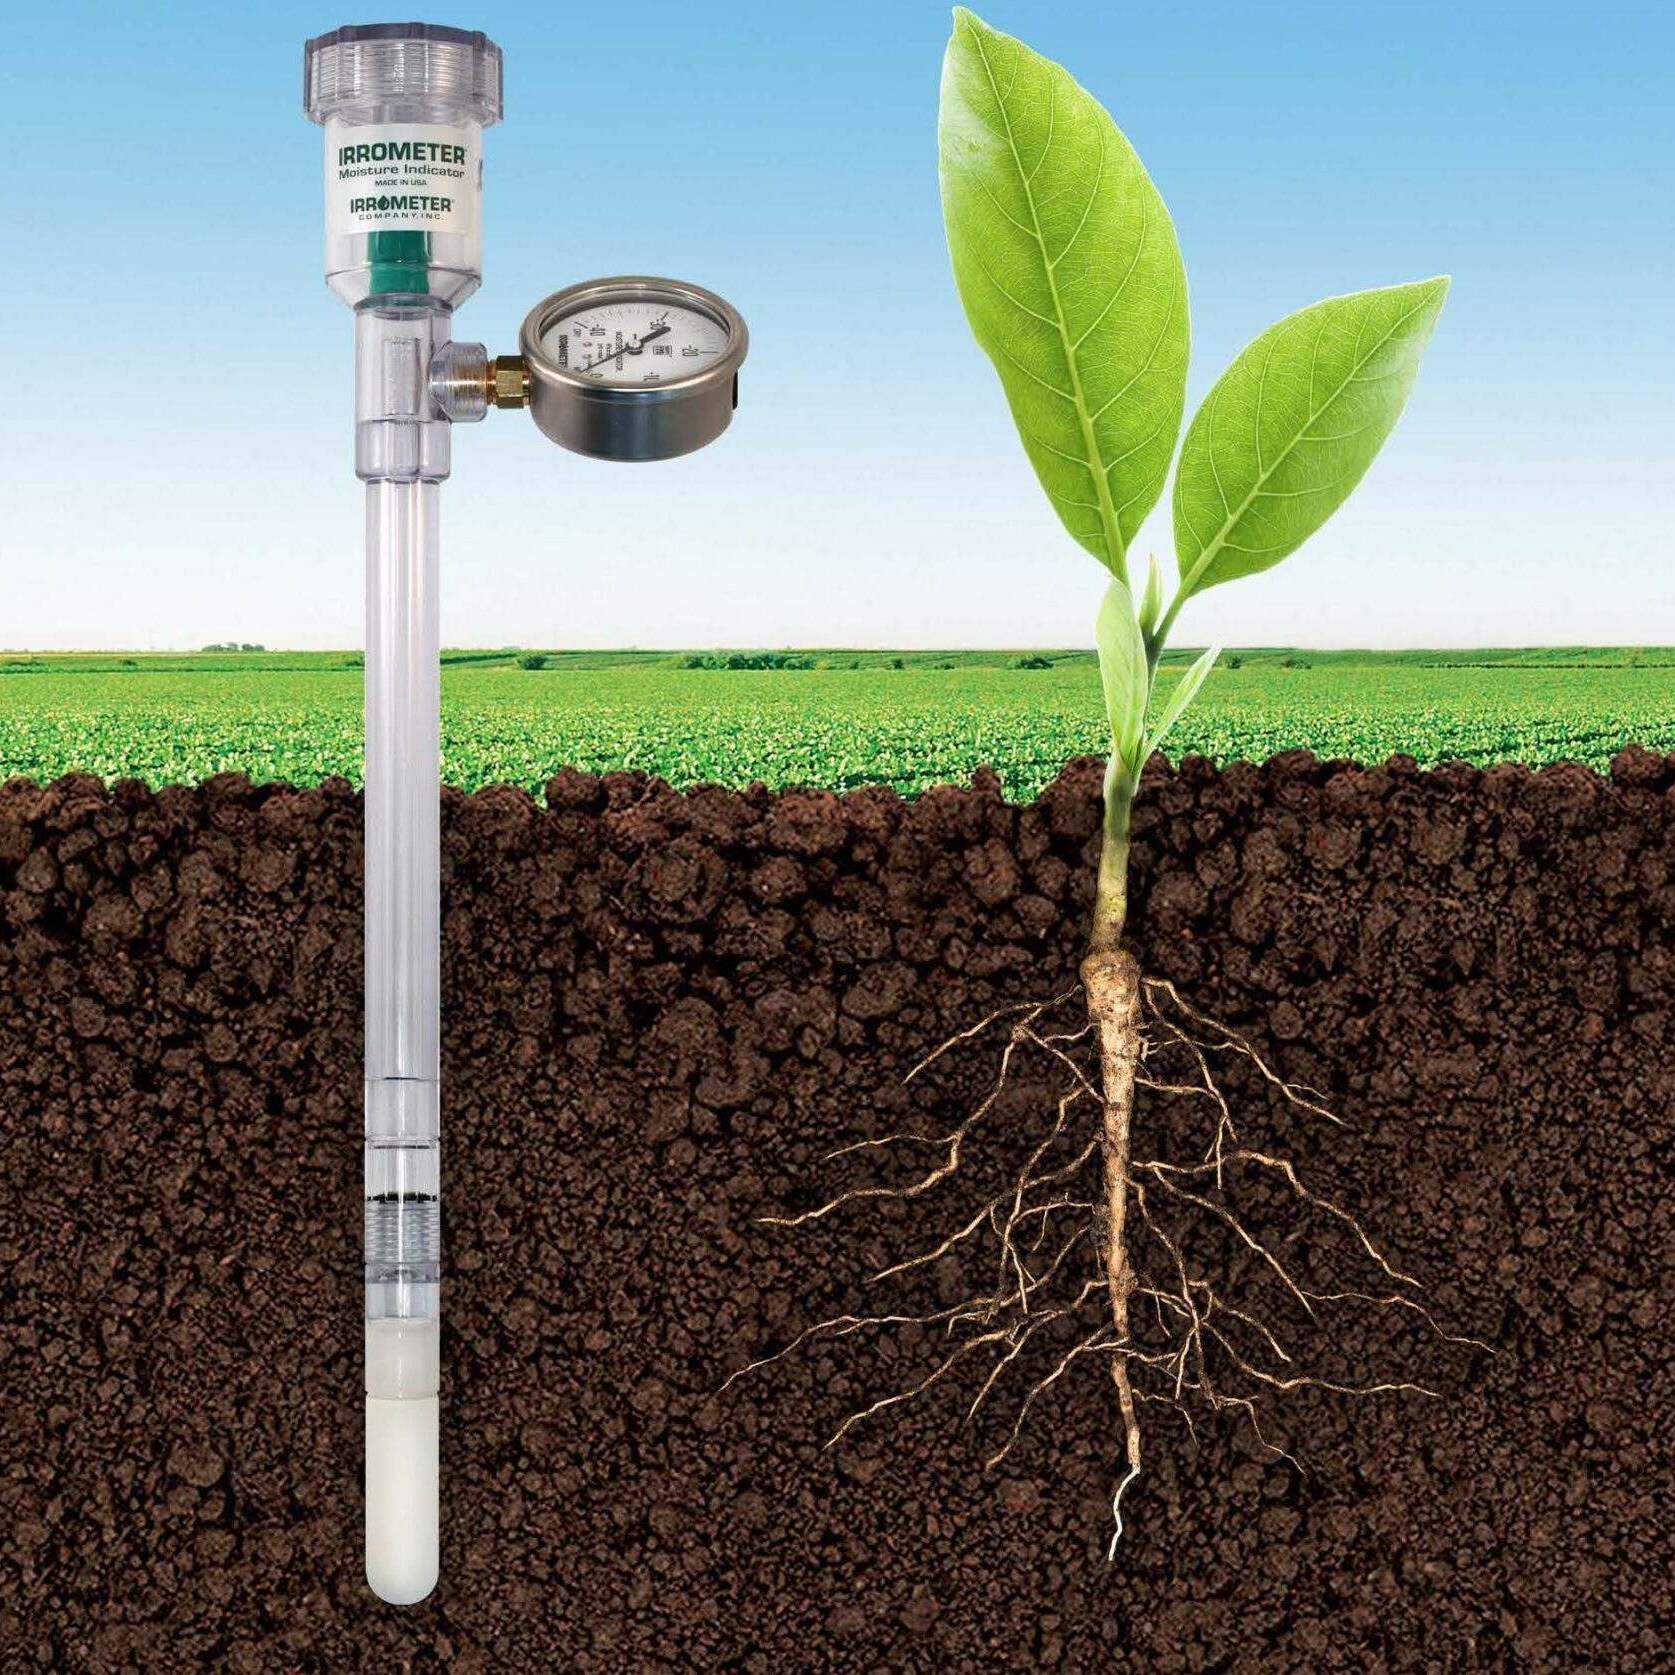 Irrometer in soil next to roots